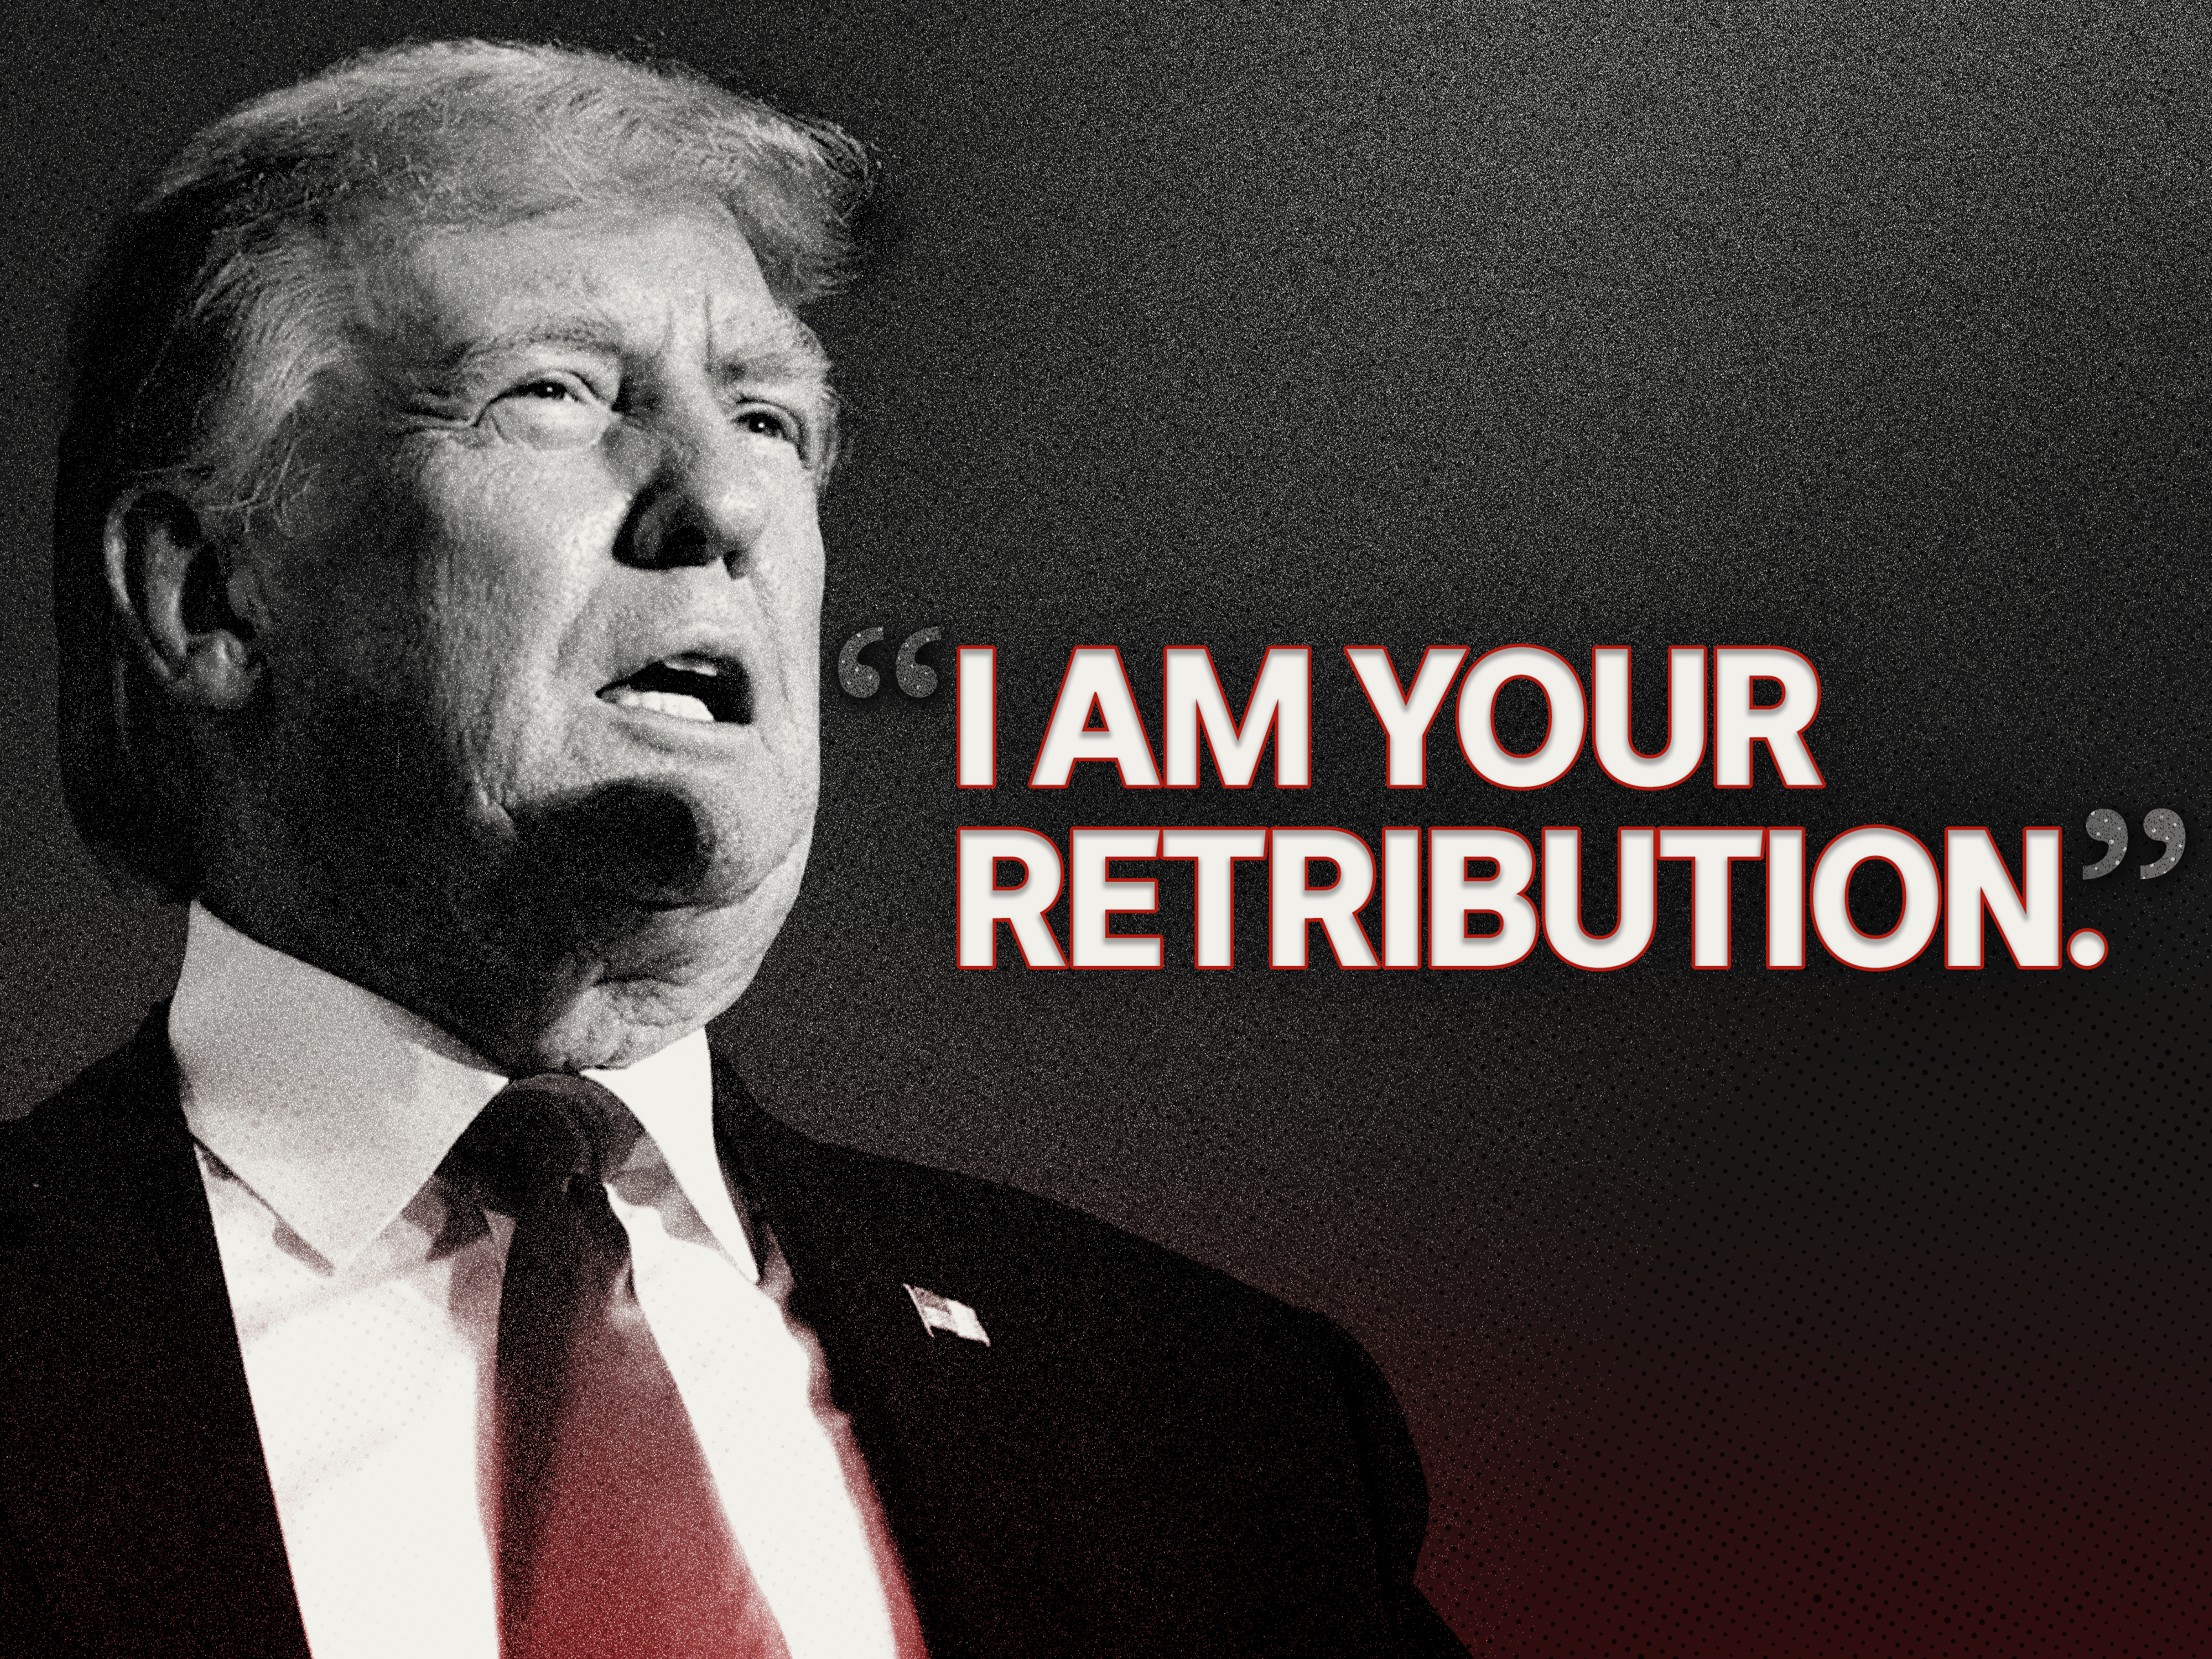 A headshot of Donald Trump next to the words "I am your retribution".